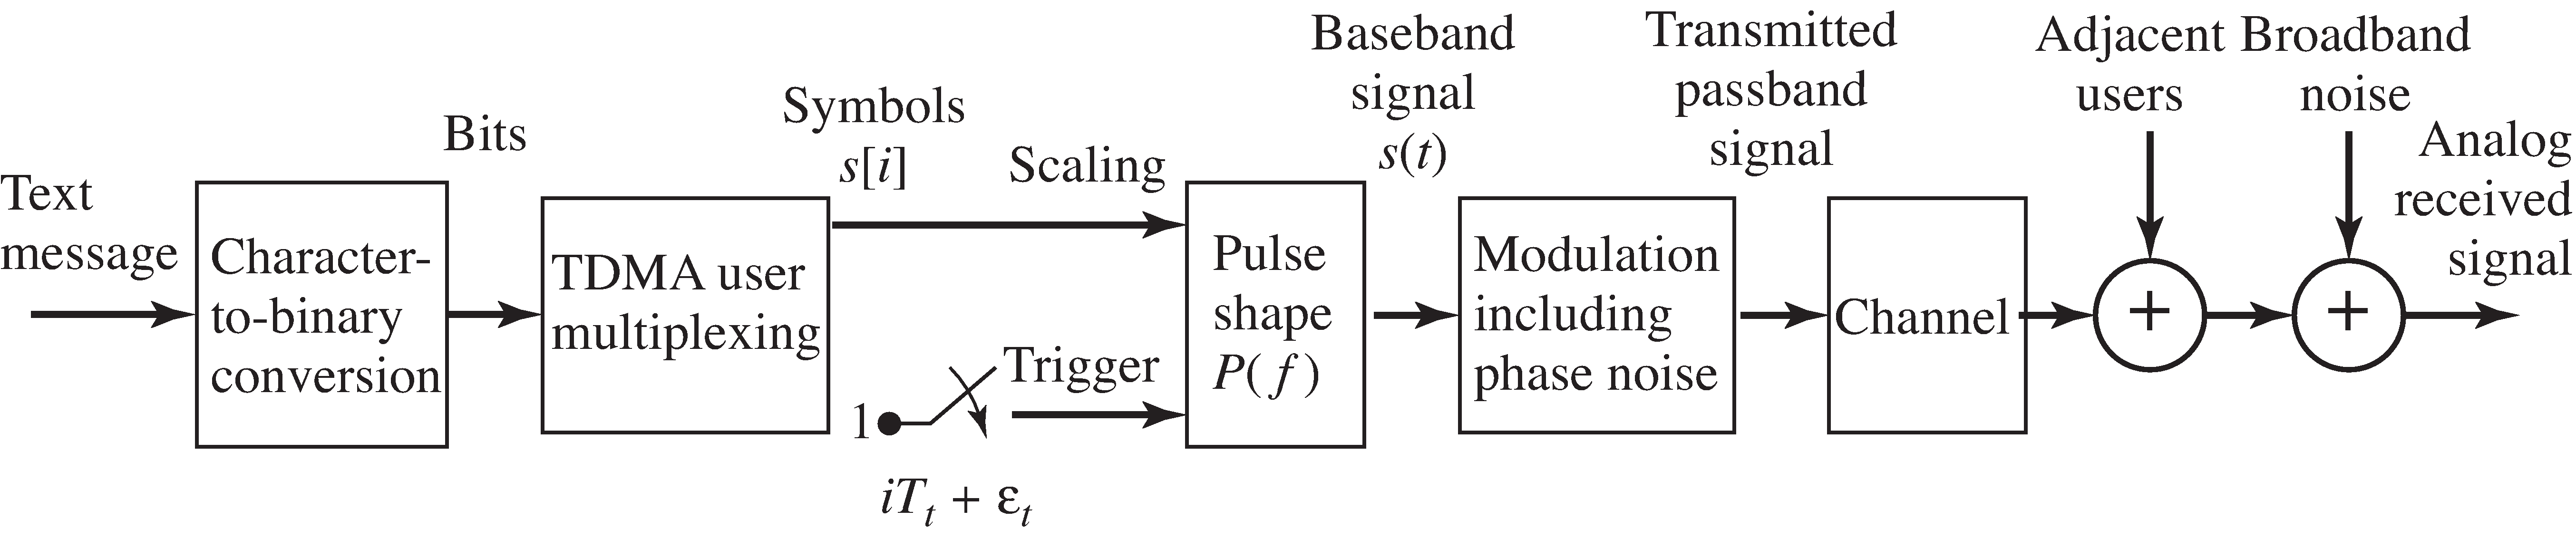 Signal flow diagram of the B^3IG Transmitter closely follows the M^6 transmitter of Figure 15-1 on page 213.